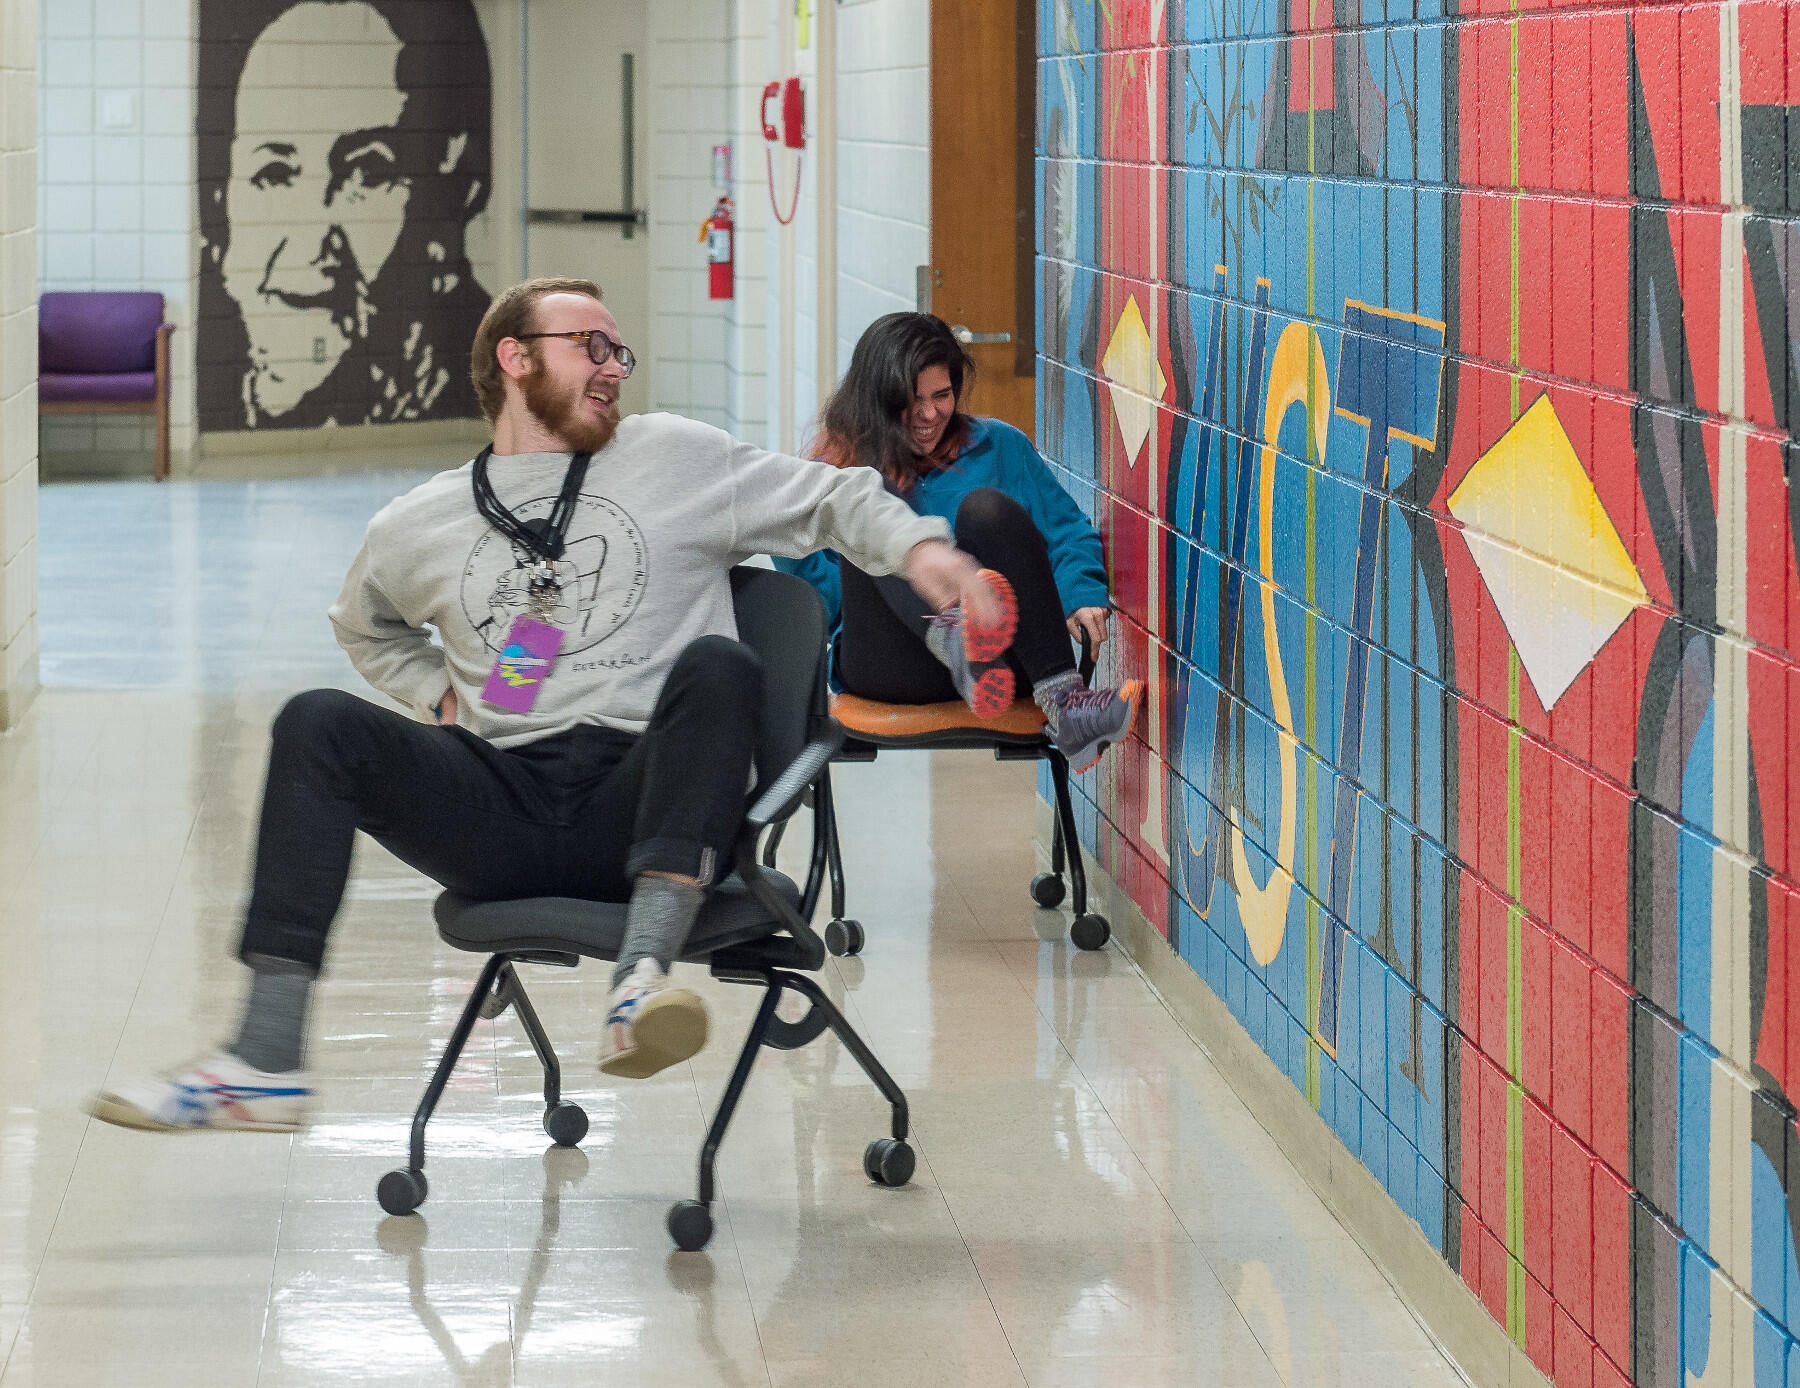 As CreateAthon@VCU stretches through the night, students take breaks to entertain themselves, take part in yoga and improv, and munch on donated snacks and pizza.